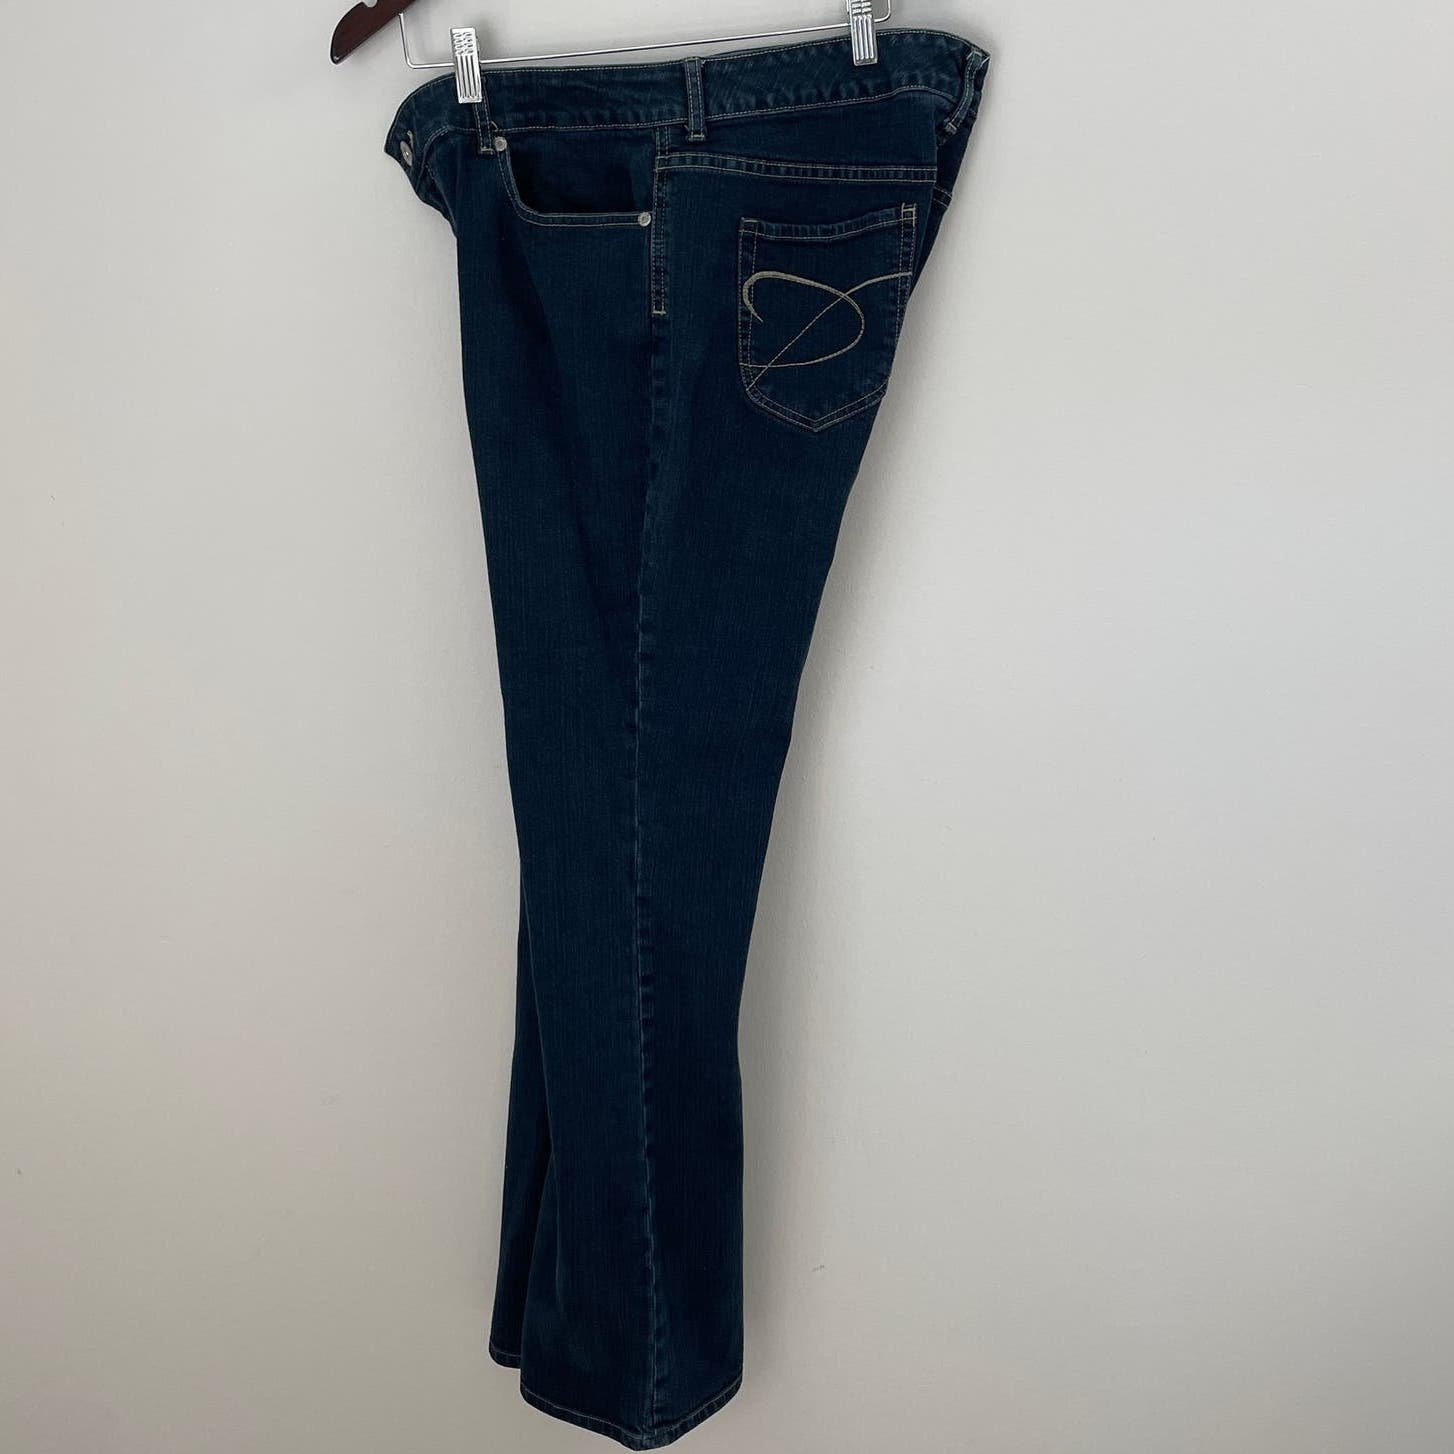 Authentic CHICO´S Platinum Boot Cut Denim Jeans Dark Wash Chico´s Size 2 or US L or 12 fixQBrysH Outlet Store